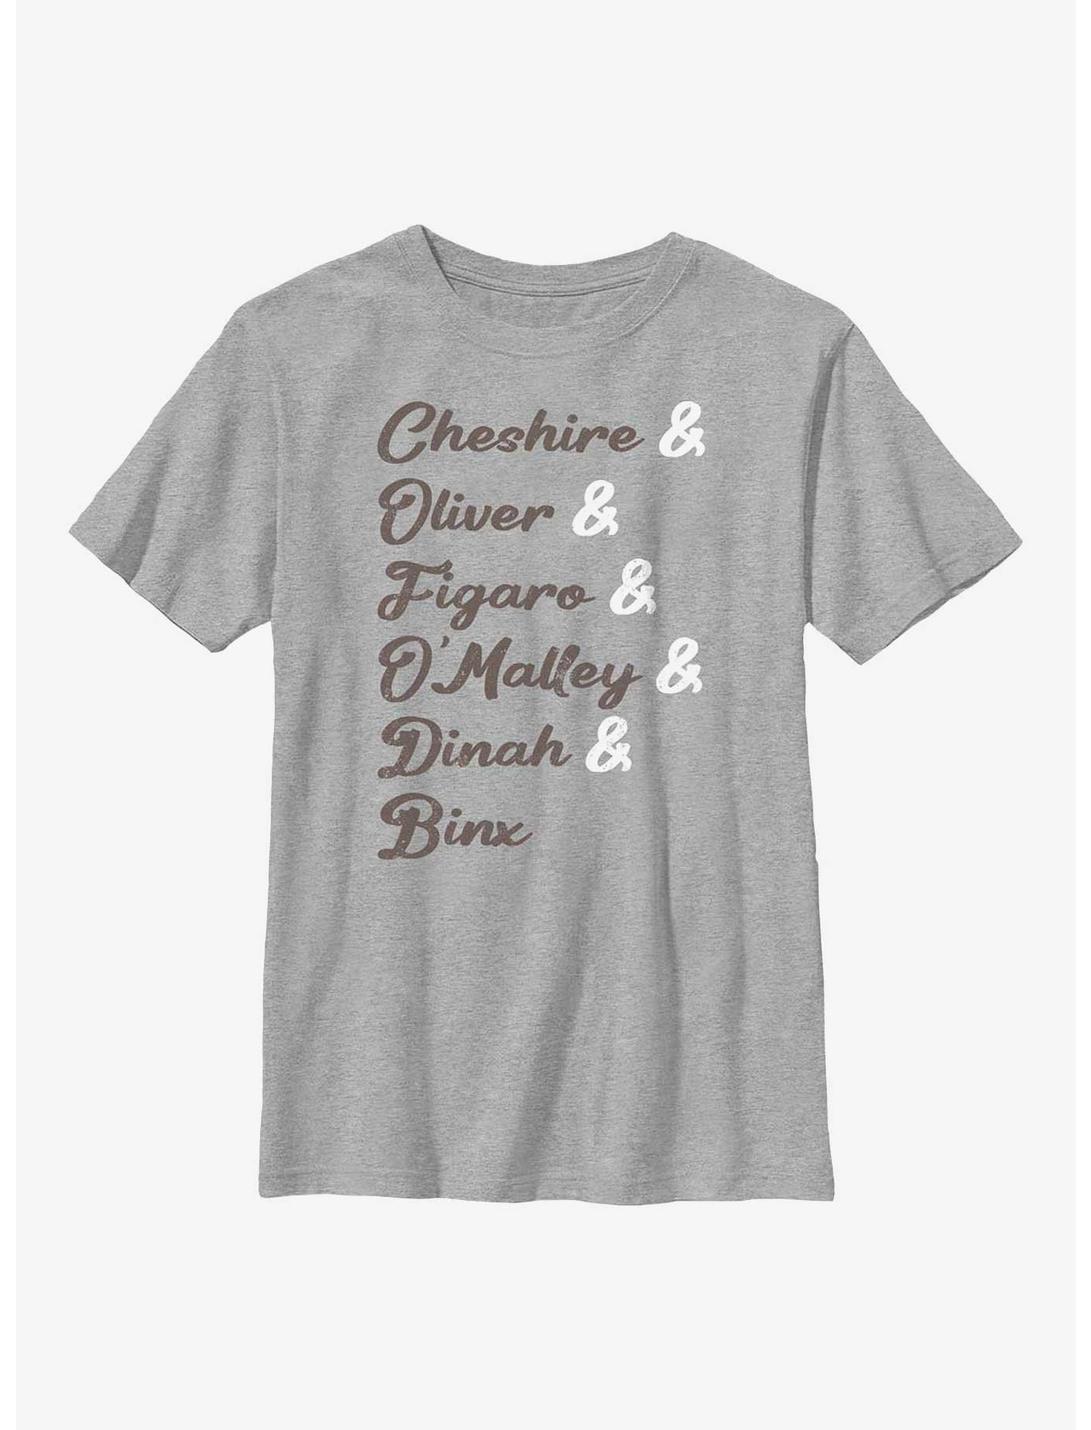 Disney Channel Cheshire, Oliver, Figaro, O'Malley, Dinah, Binx Youth T-Shirt, ATH HTR, hi-res